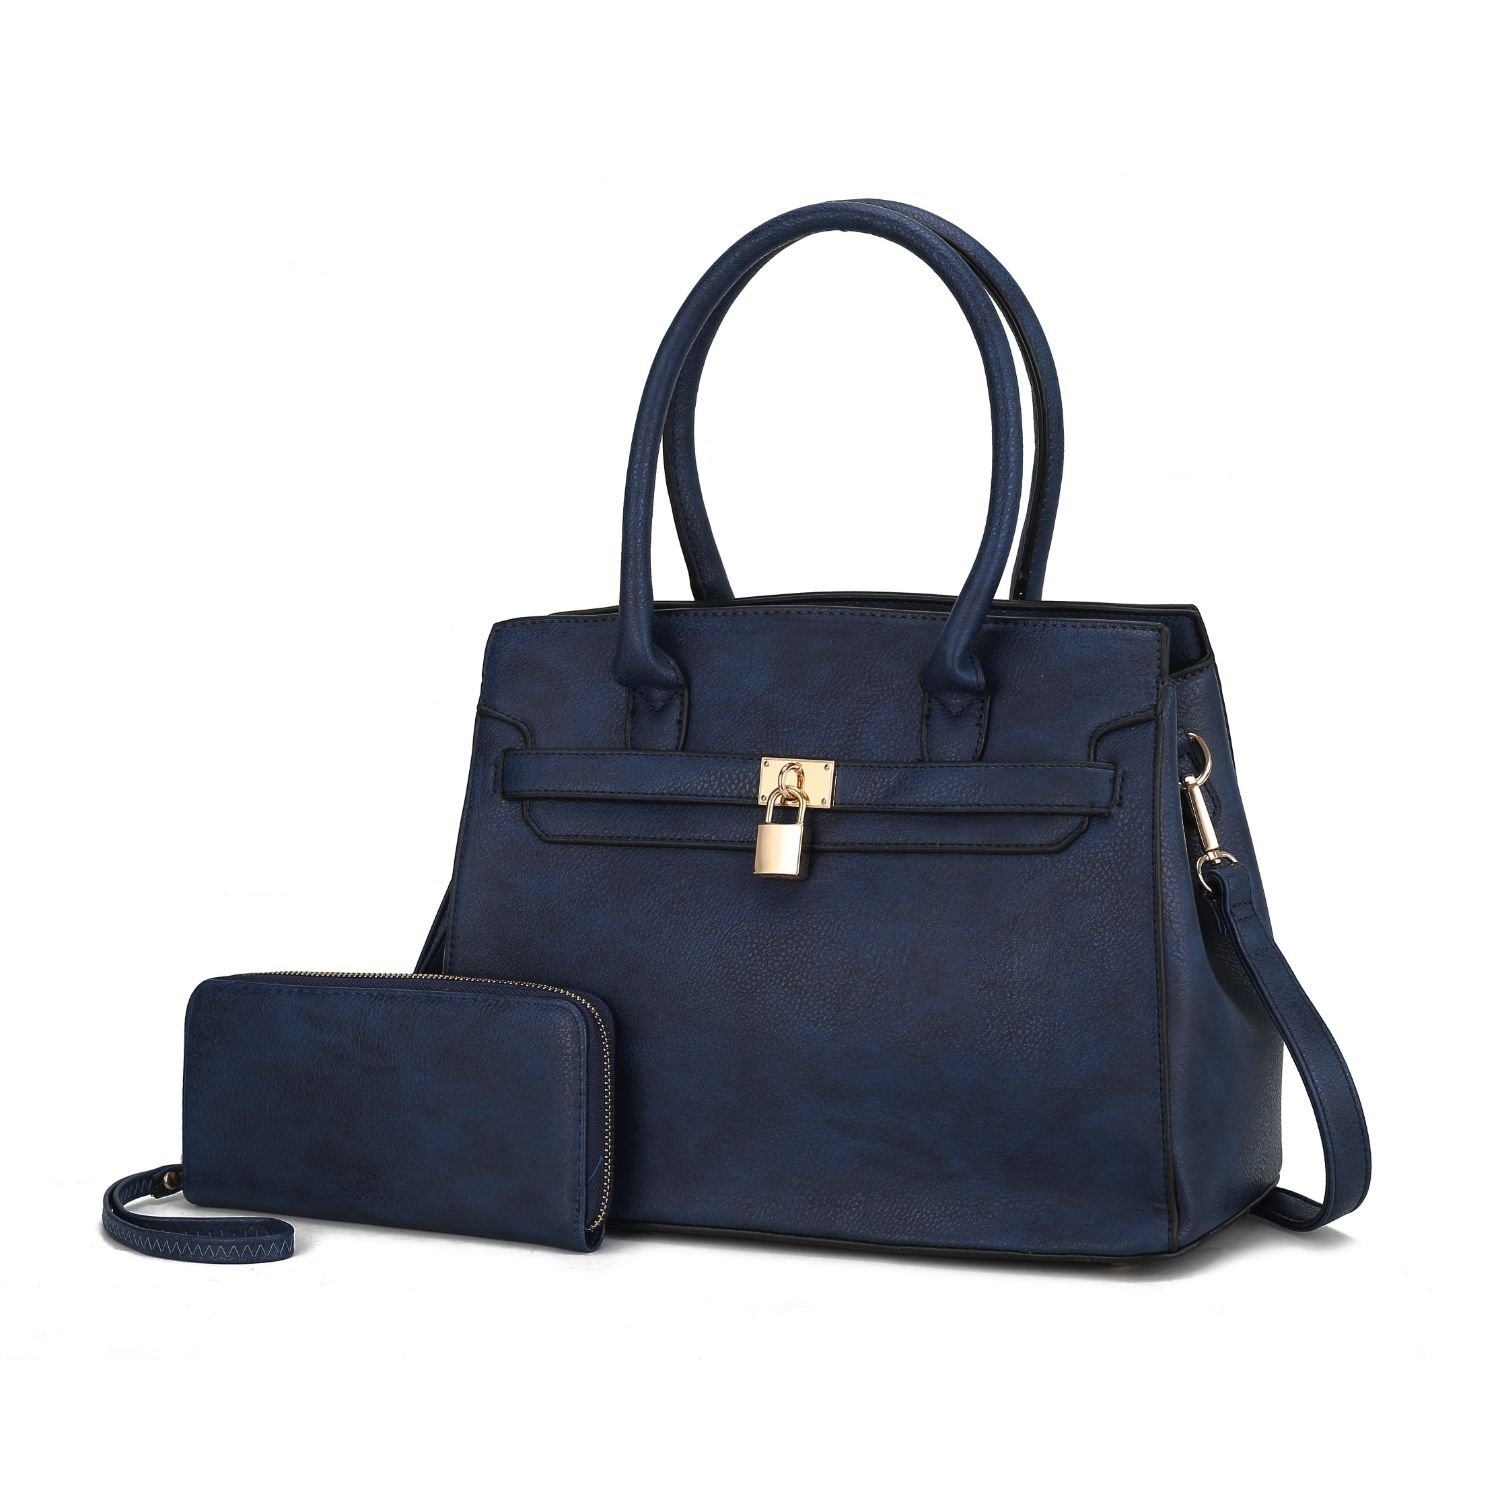 MKF Collection Bruna Satchel Handbag With A Matching Wallet By Mia K -2 Pieces Set - Navy Blue